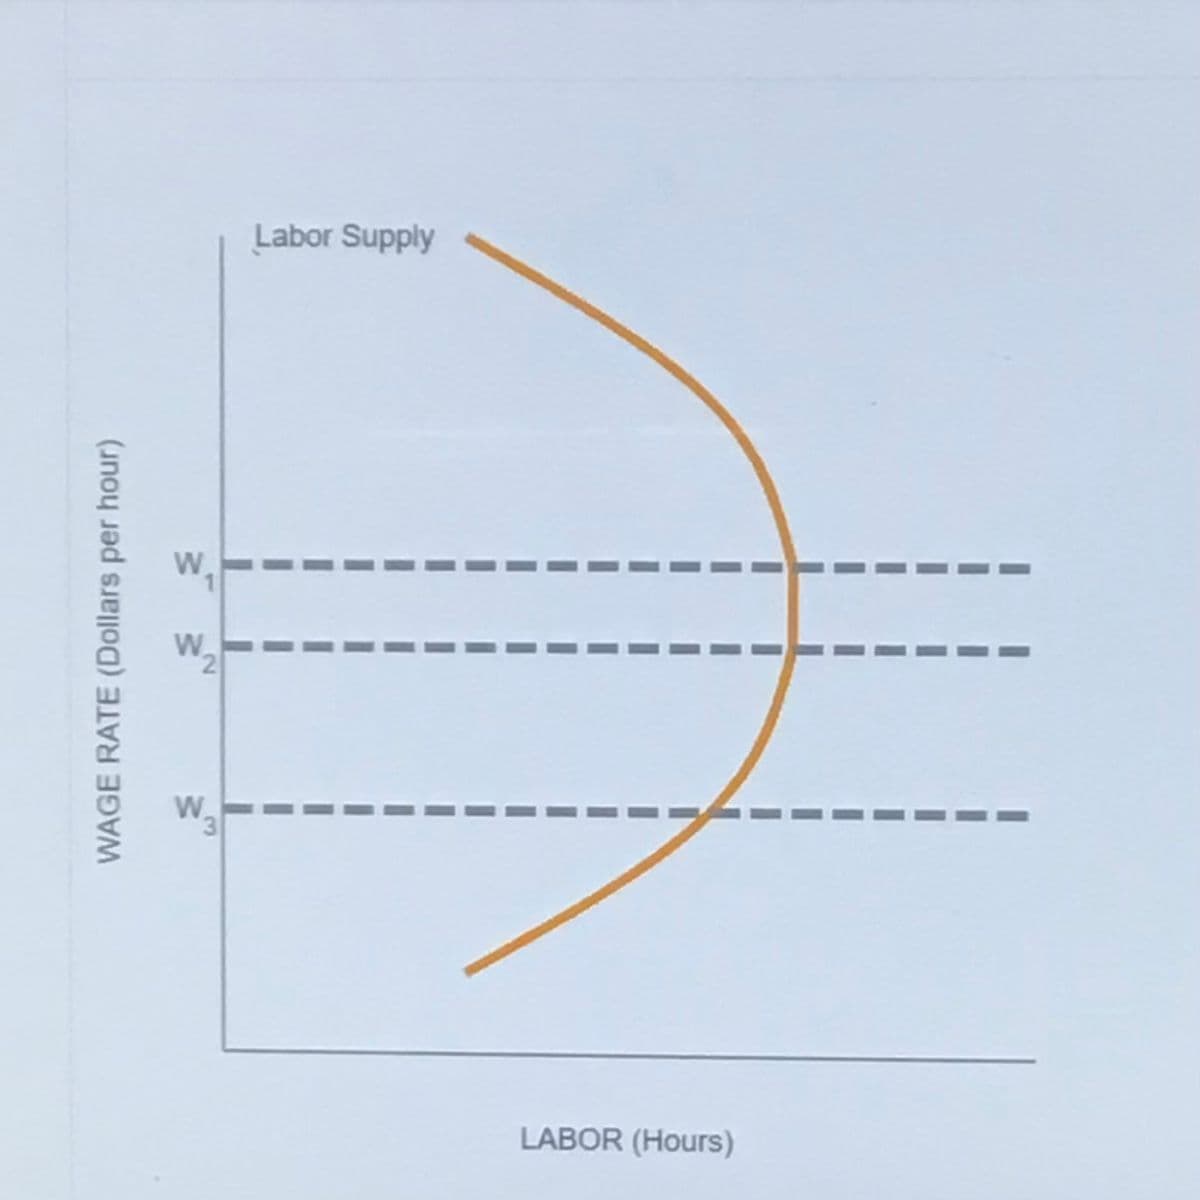 Labor Supply
W
W
2.
LABOR (Hours)
WAGE RATE (Dollars per hour)
